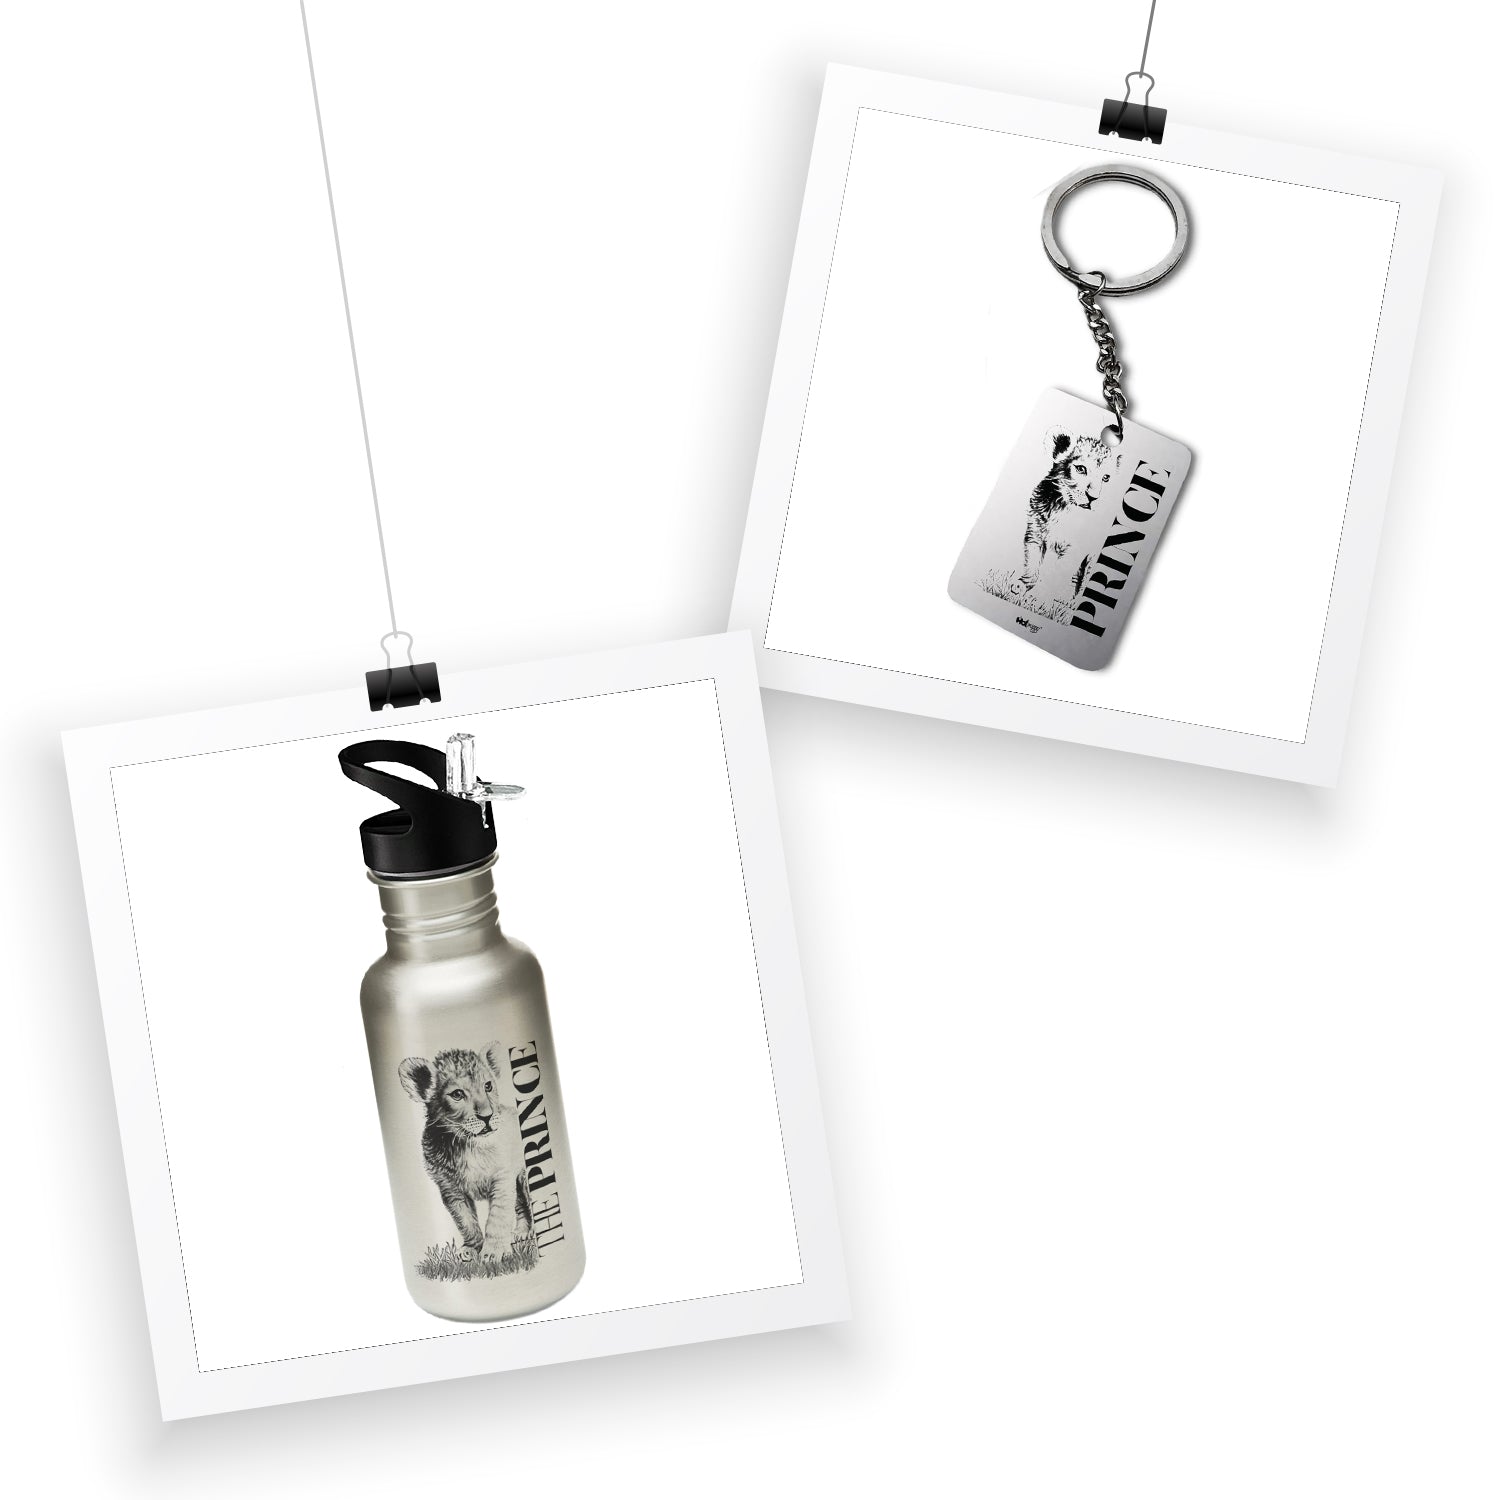 The Prince - BPA Free Sustainable Stainless Steel Water Bottle with Keychain (1 Bottle, 1 Keychain)